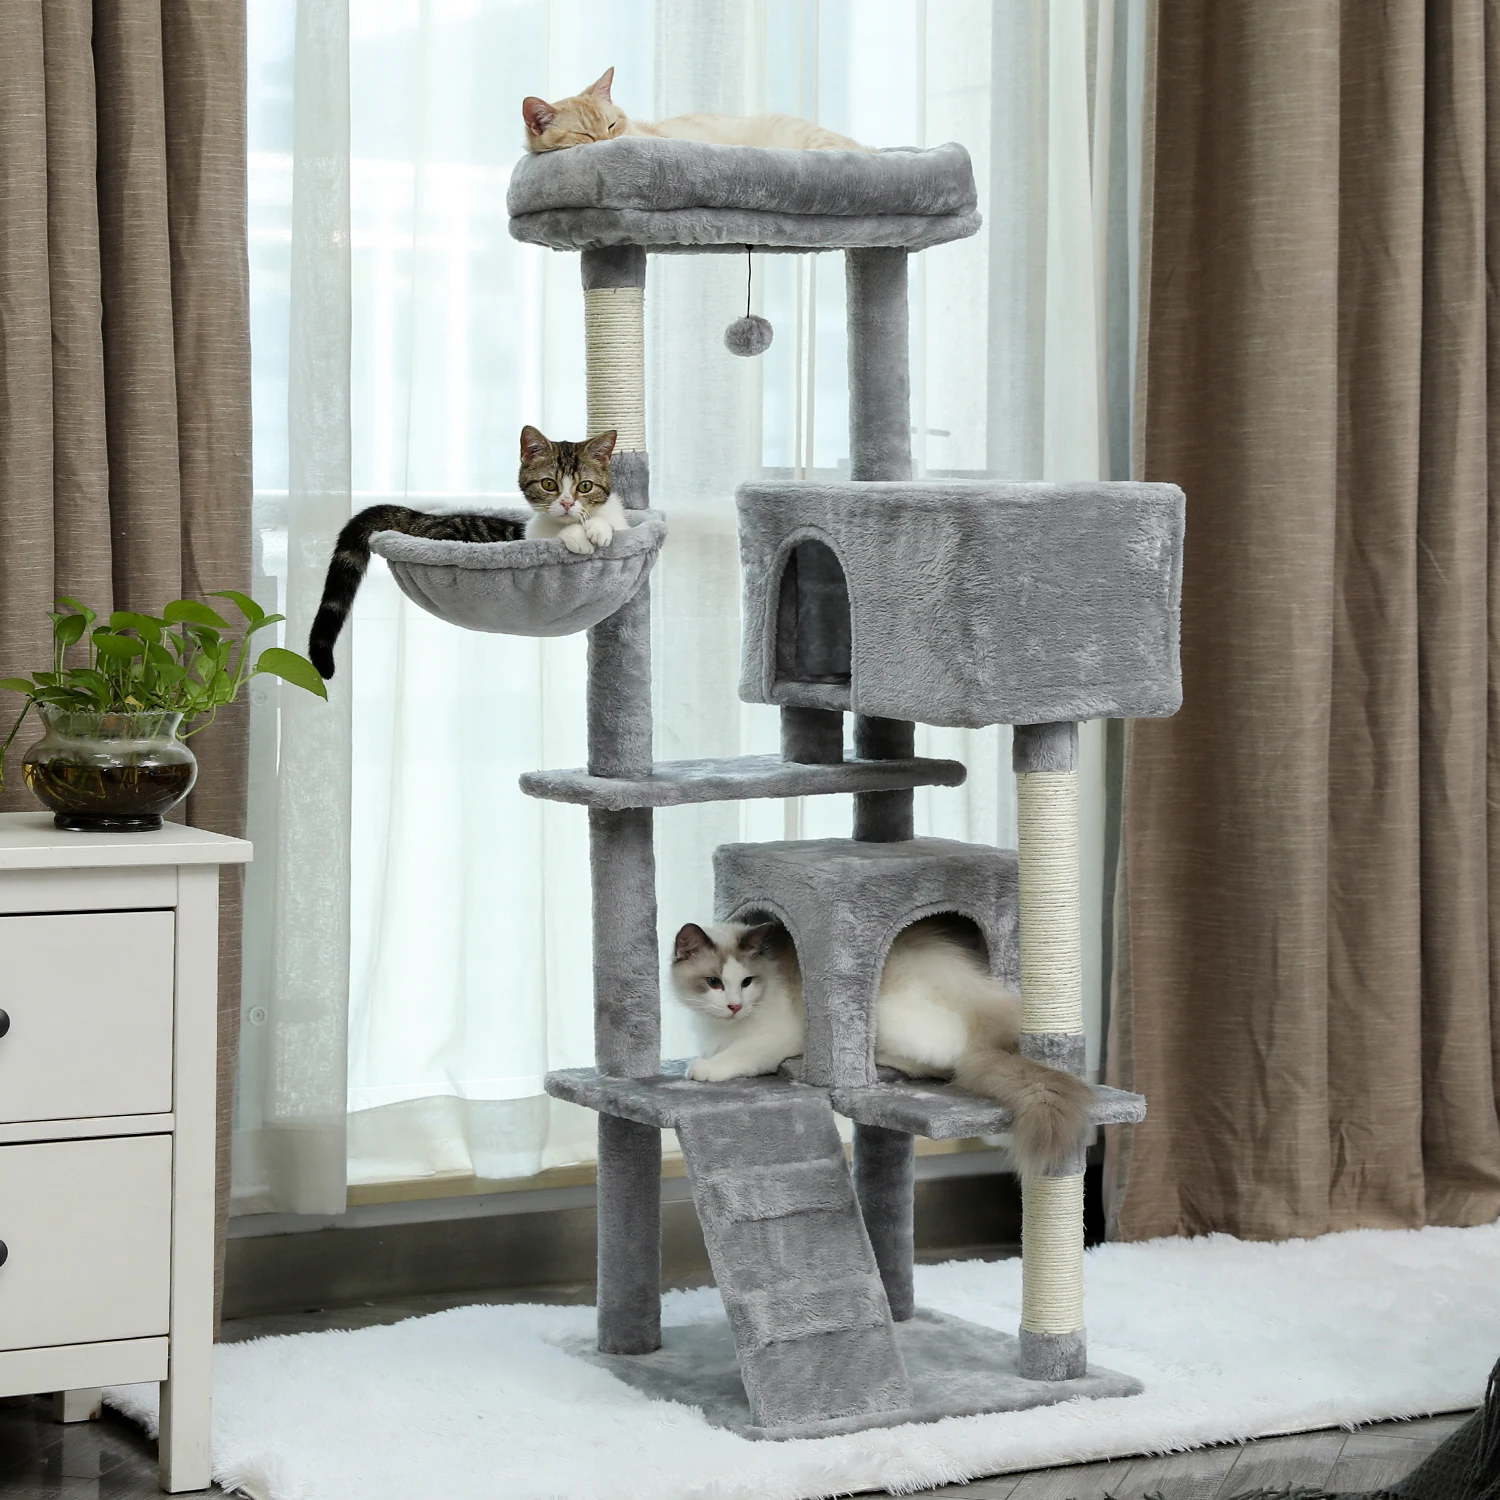 

Extra-Large Perch Cat Tree 143cm High Tower for Big Cats with Cozy Hammock Shelves Pompom Toy Scratching Posts Dual Condo Houses